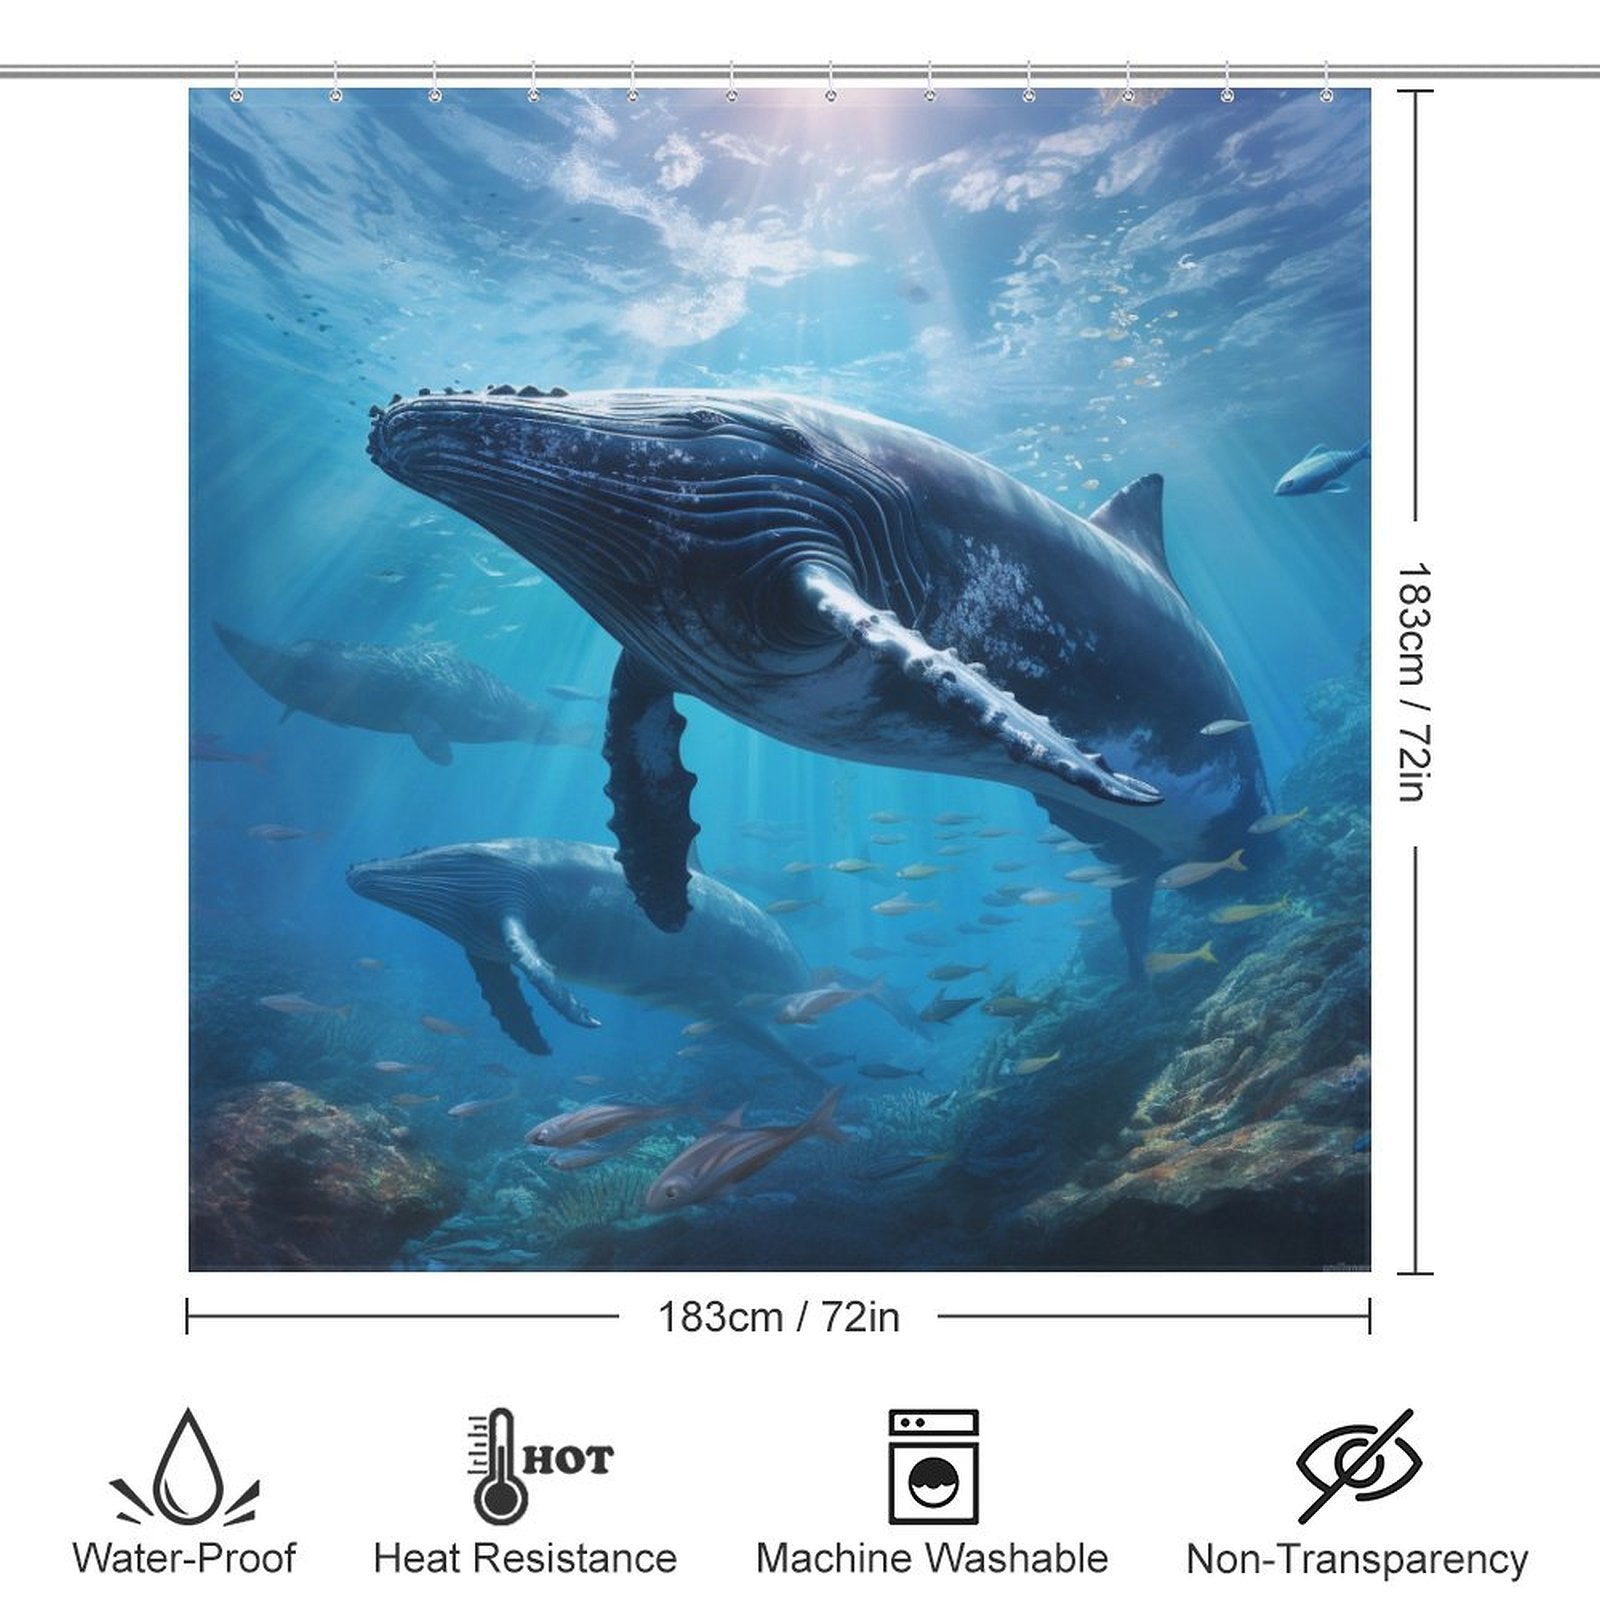 Gentle Giants Whale Shower Curtain